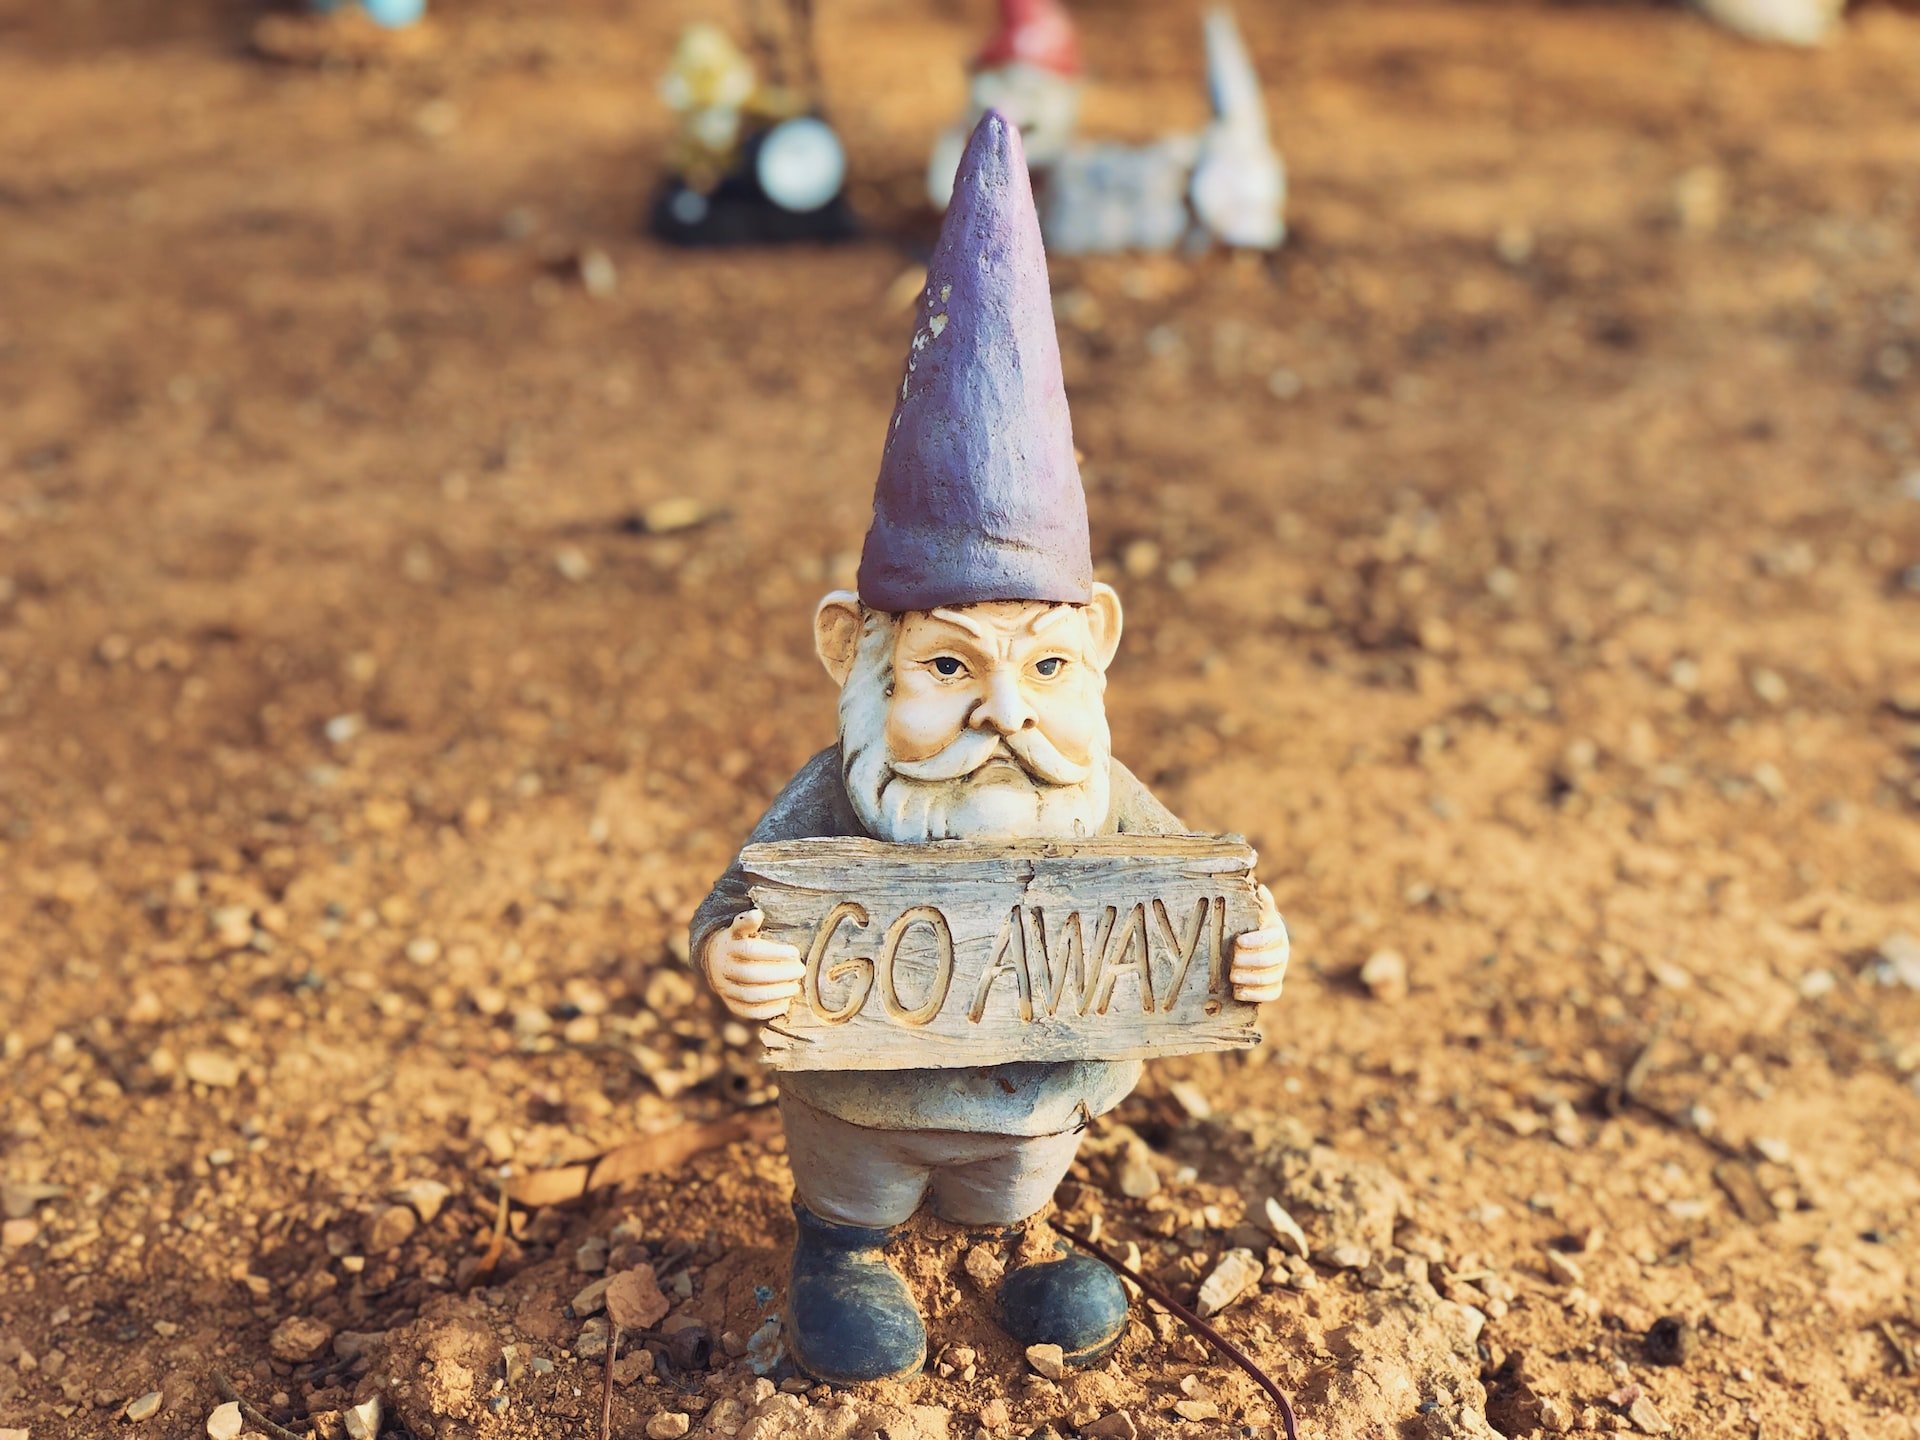 A gnome holding a sign that says 'go away'